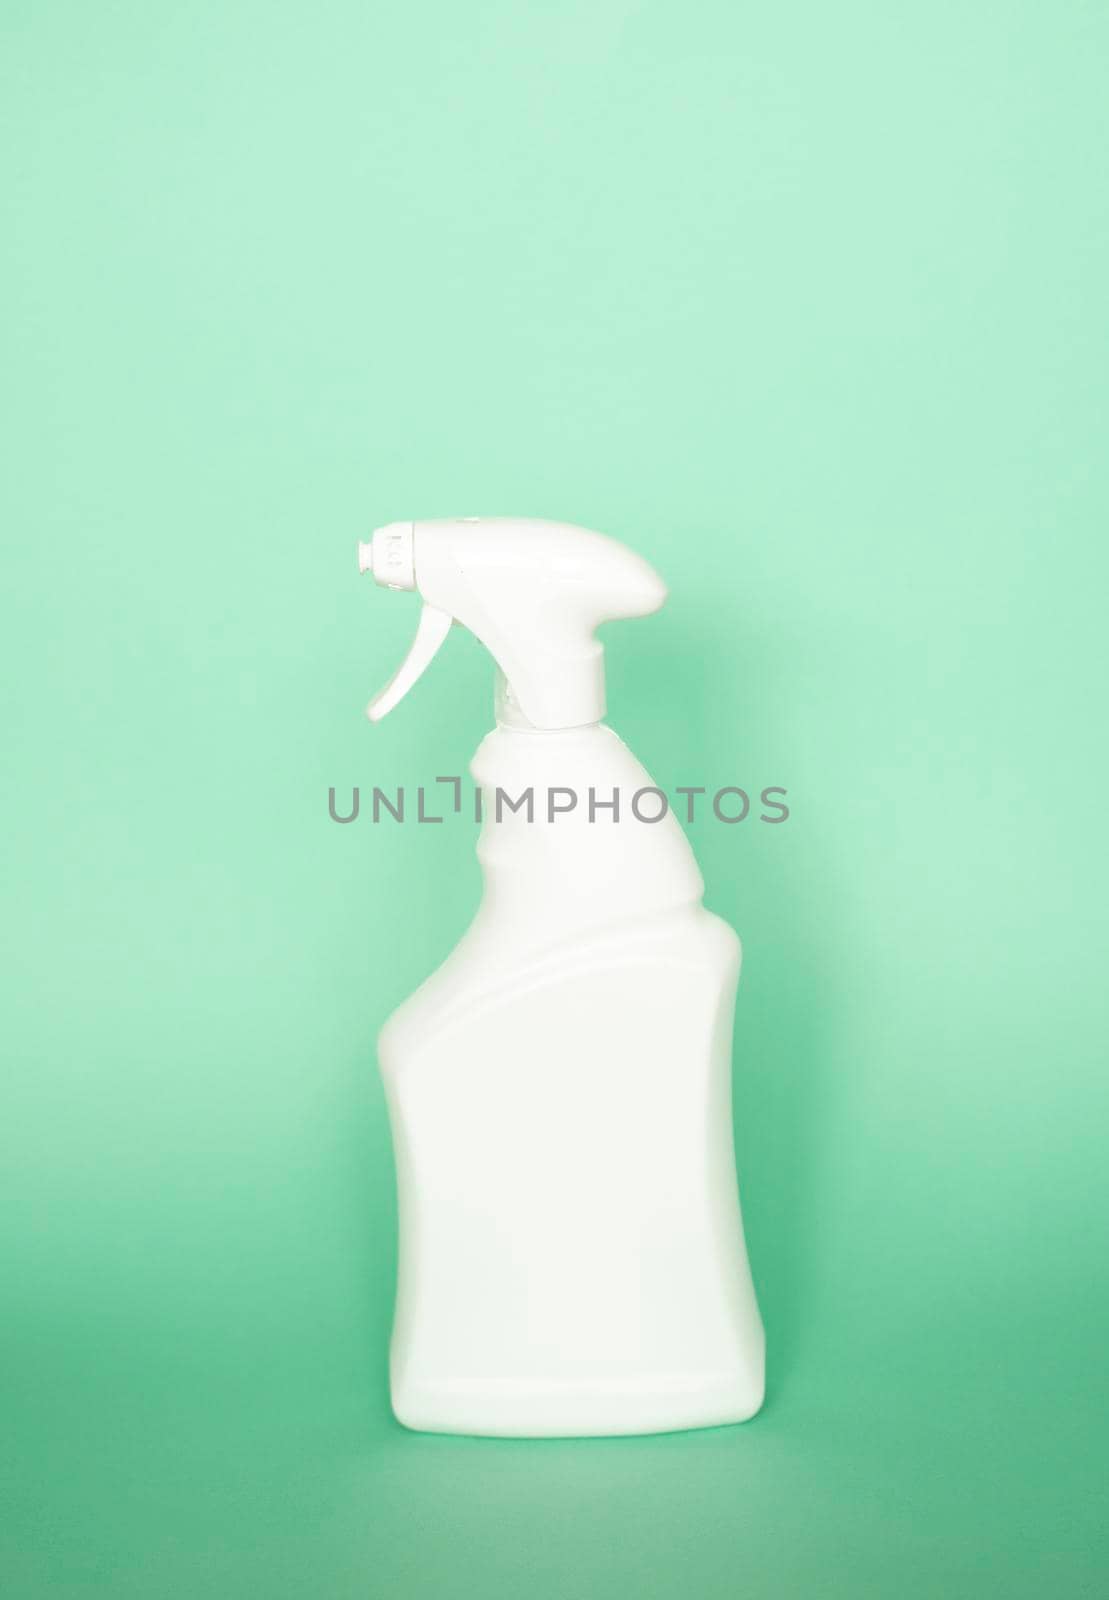 White detergent bottles or chemical cleaning supplies with a sprayer isolated on green background